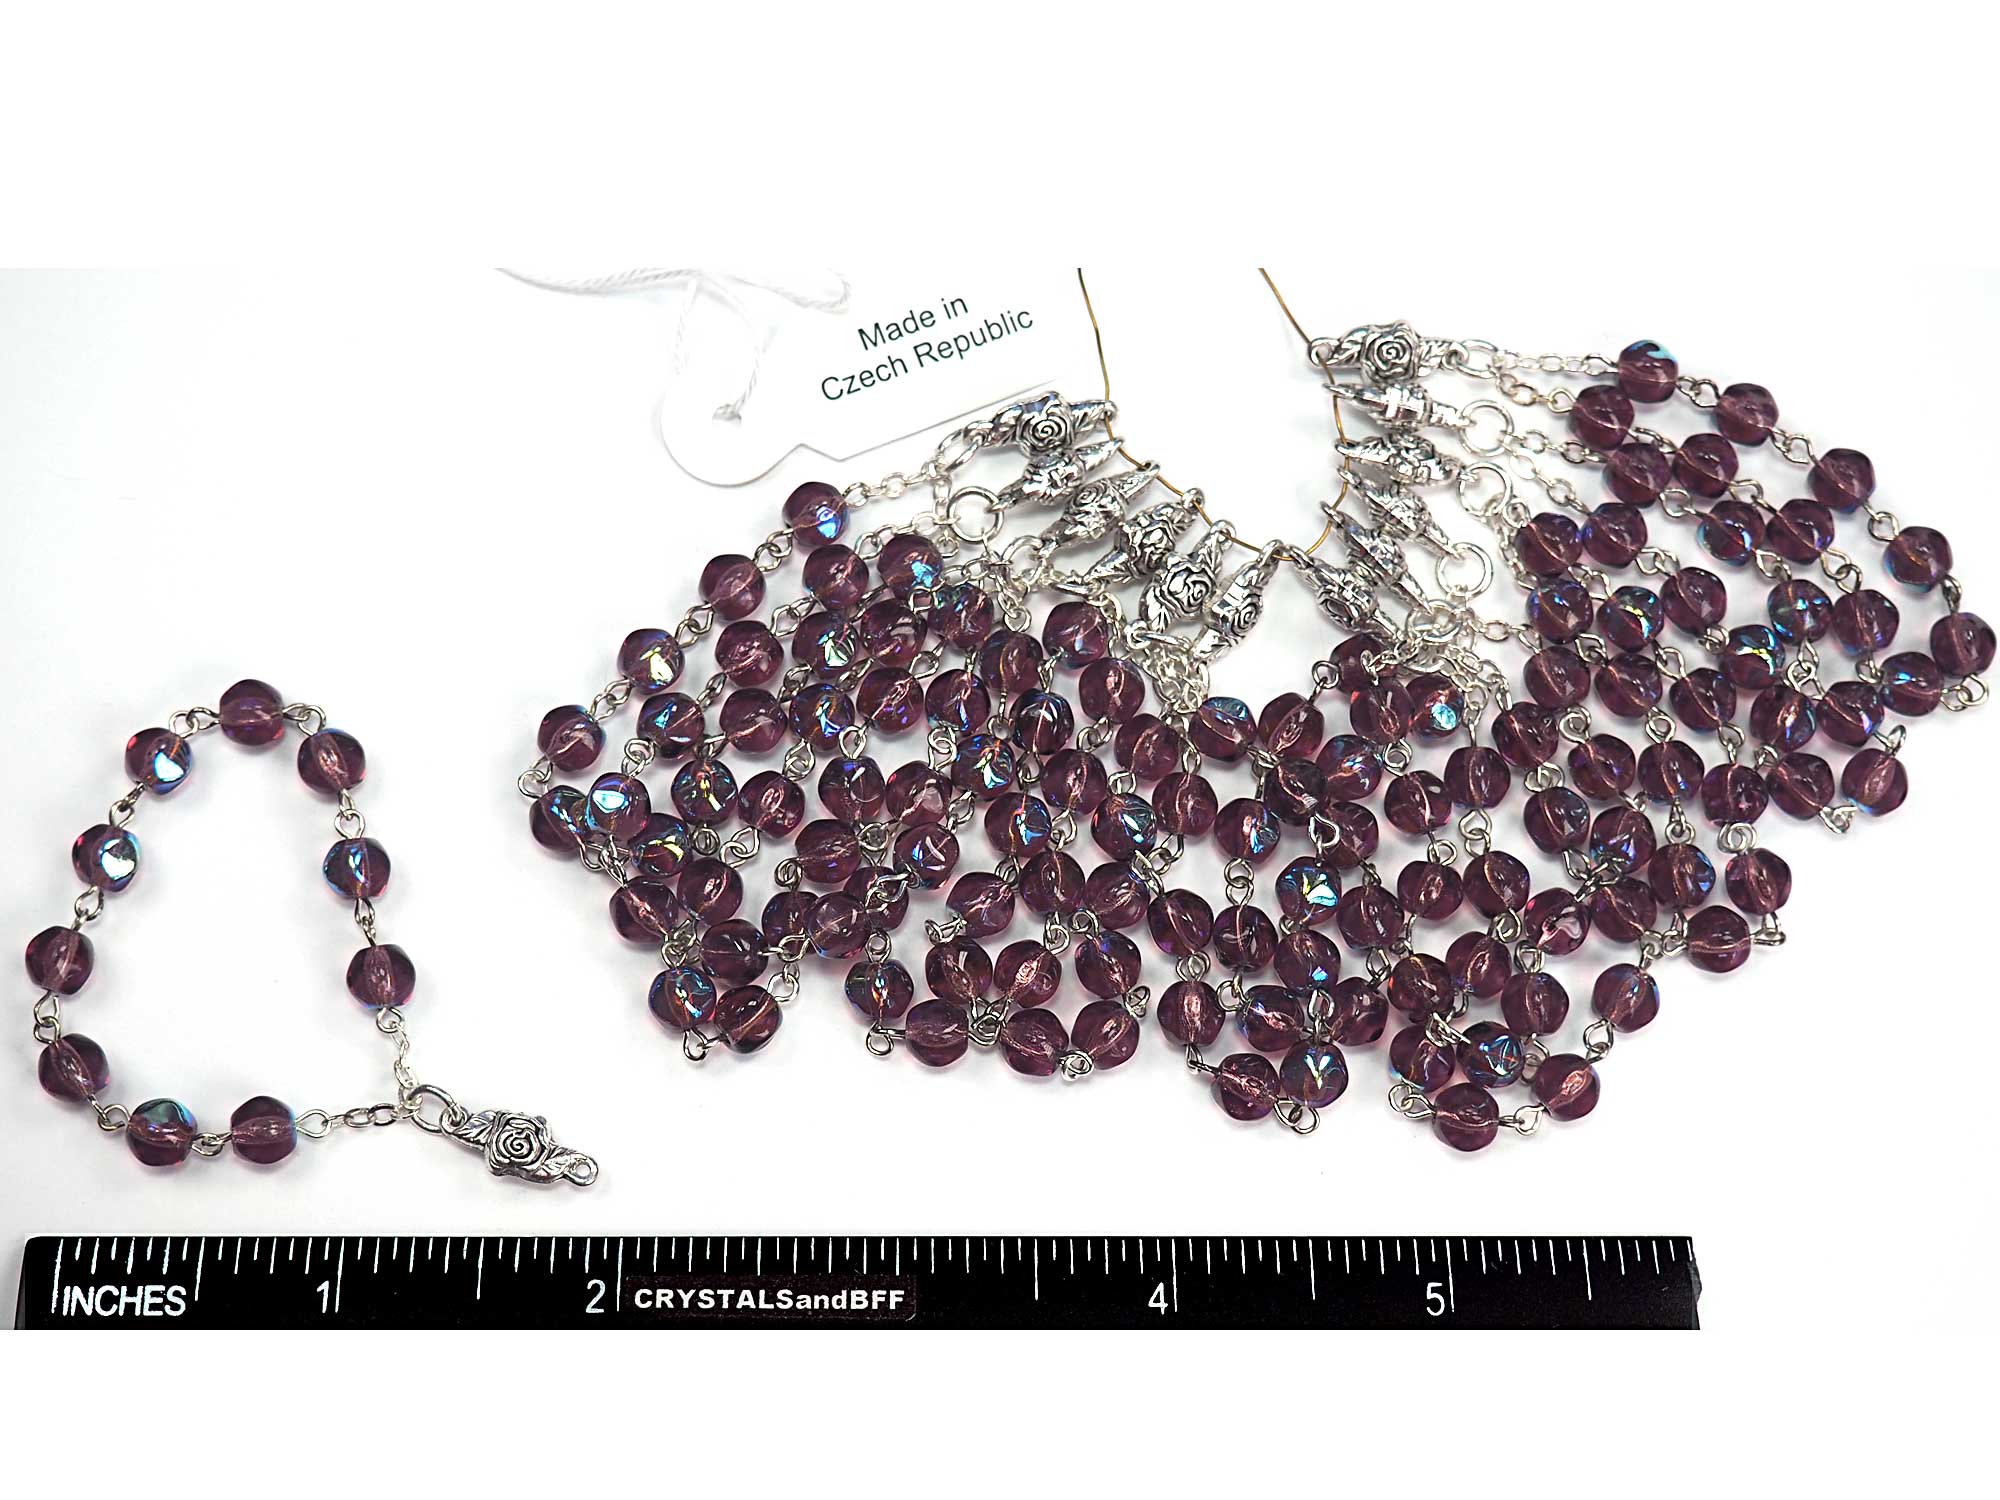 Rosary Chain - Finger Auto Rosary chain with Centerpiece, 6mm Druk Amethyst AB coated Beads, Silver Plated, P573